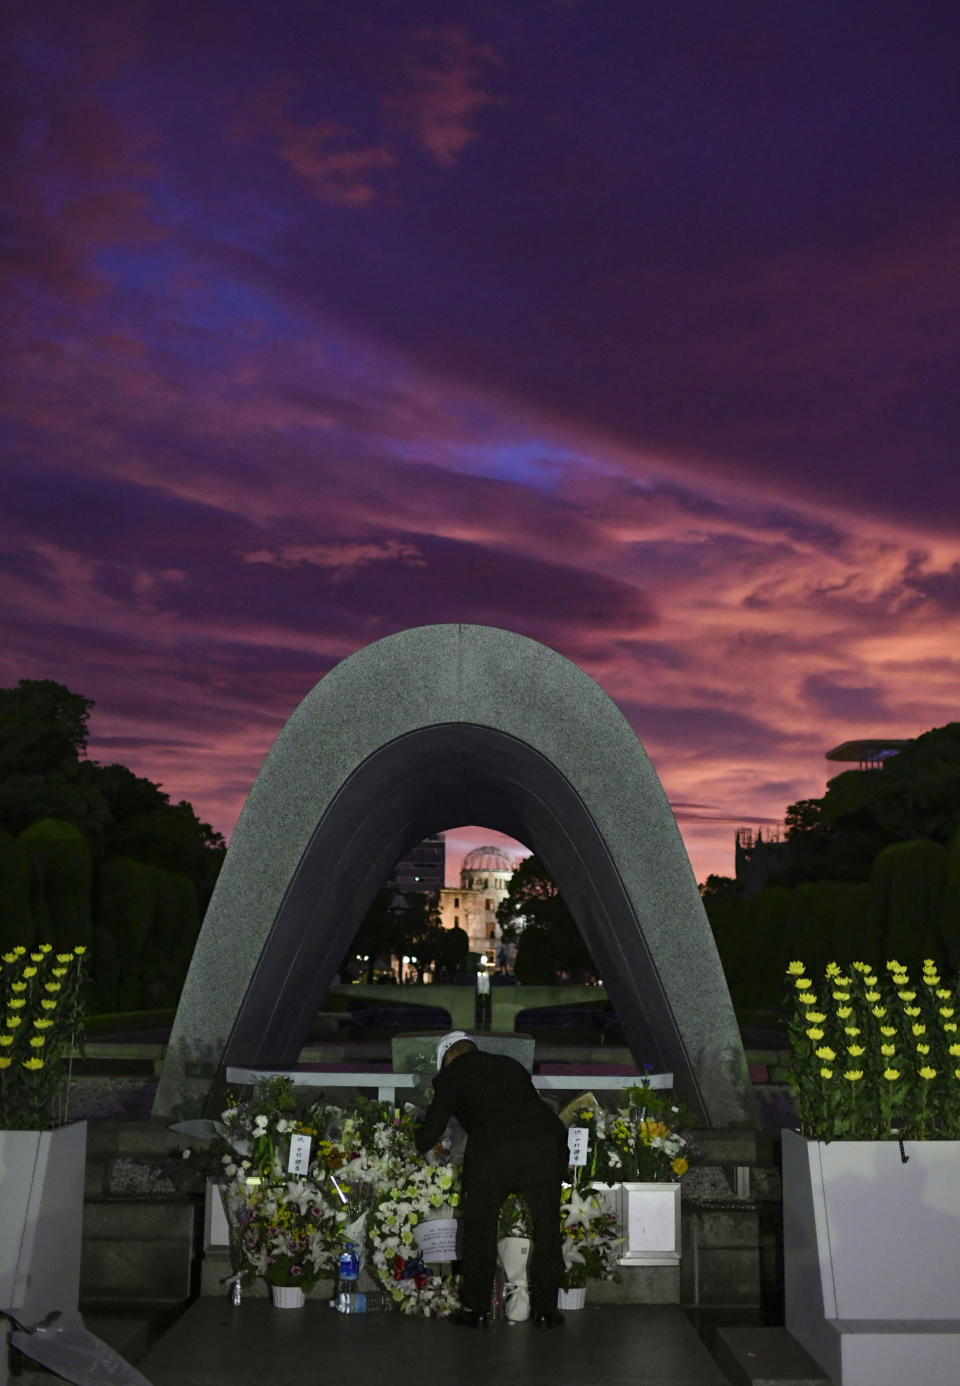 A man offers flowers for the atomic bomb victims in front of the cenotaph at the Hiroshima Peace Memorial Park in Hiroshima, western Japan during a ceremony to mark the 74th anniversary of the bombing early Tuesday, Aug. 6, 2019. (Kyodo News via AP)